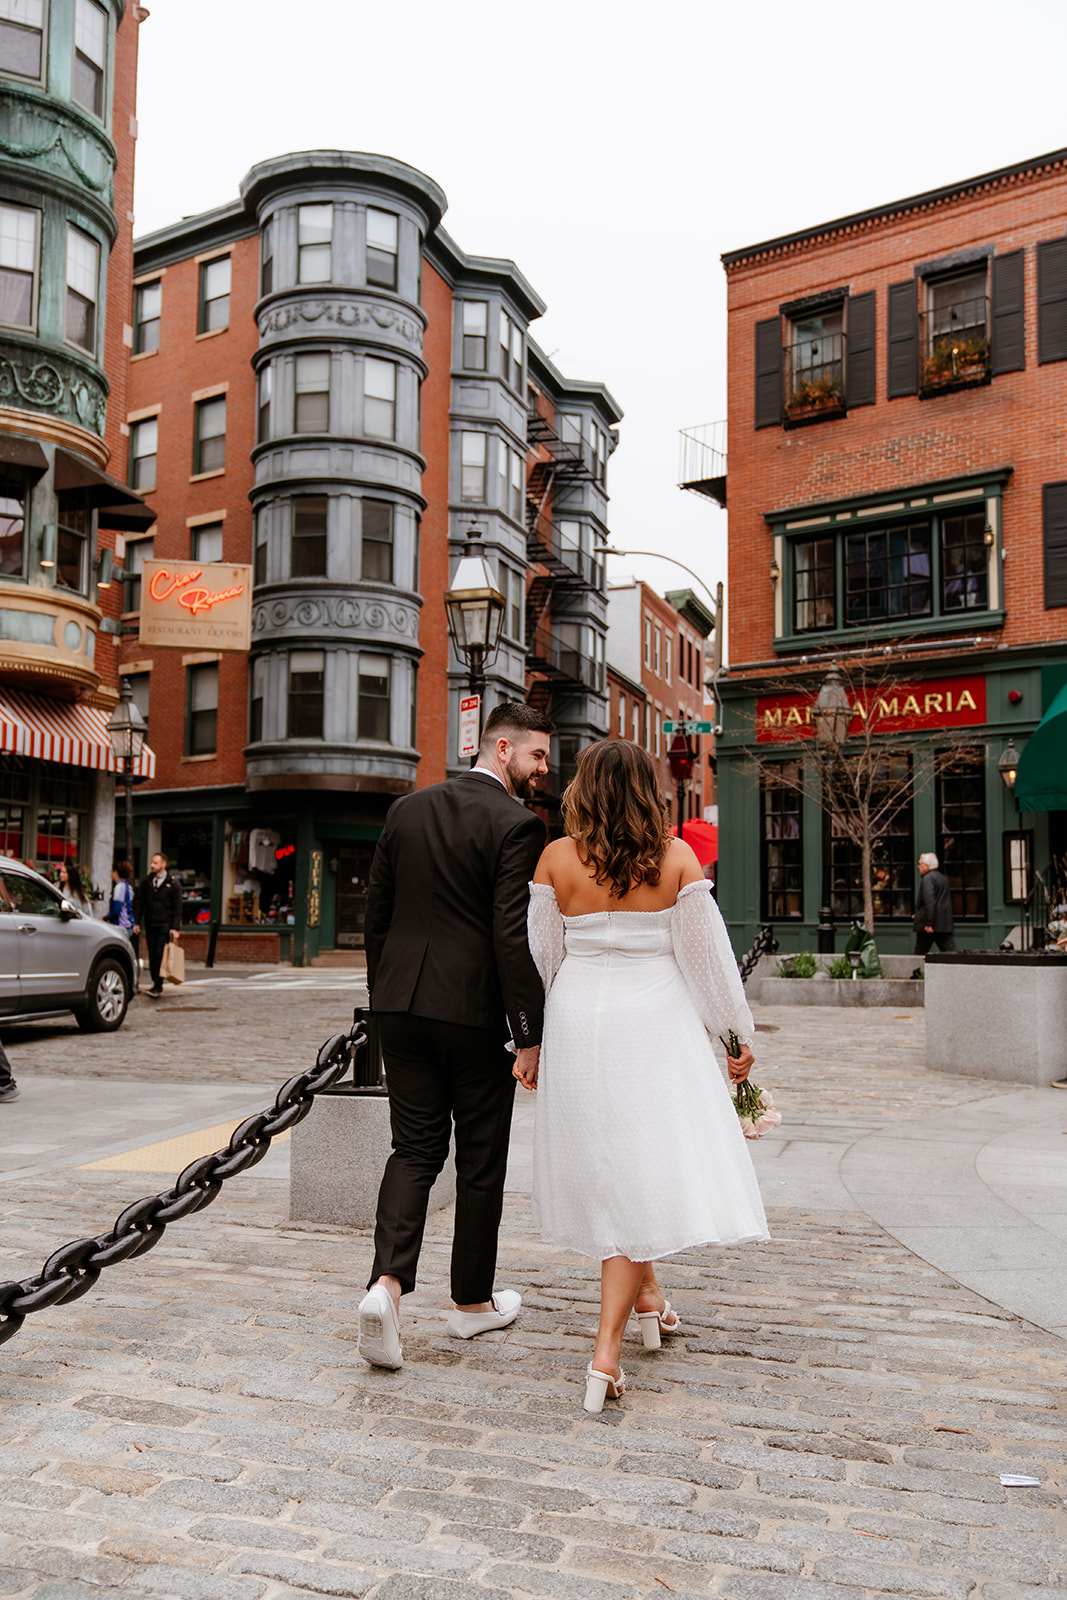 A couple embraces in a cobblestone street surrounded by red brick buildings in North End for their Engagement photos in Boston